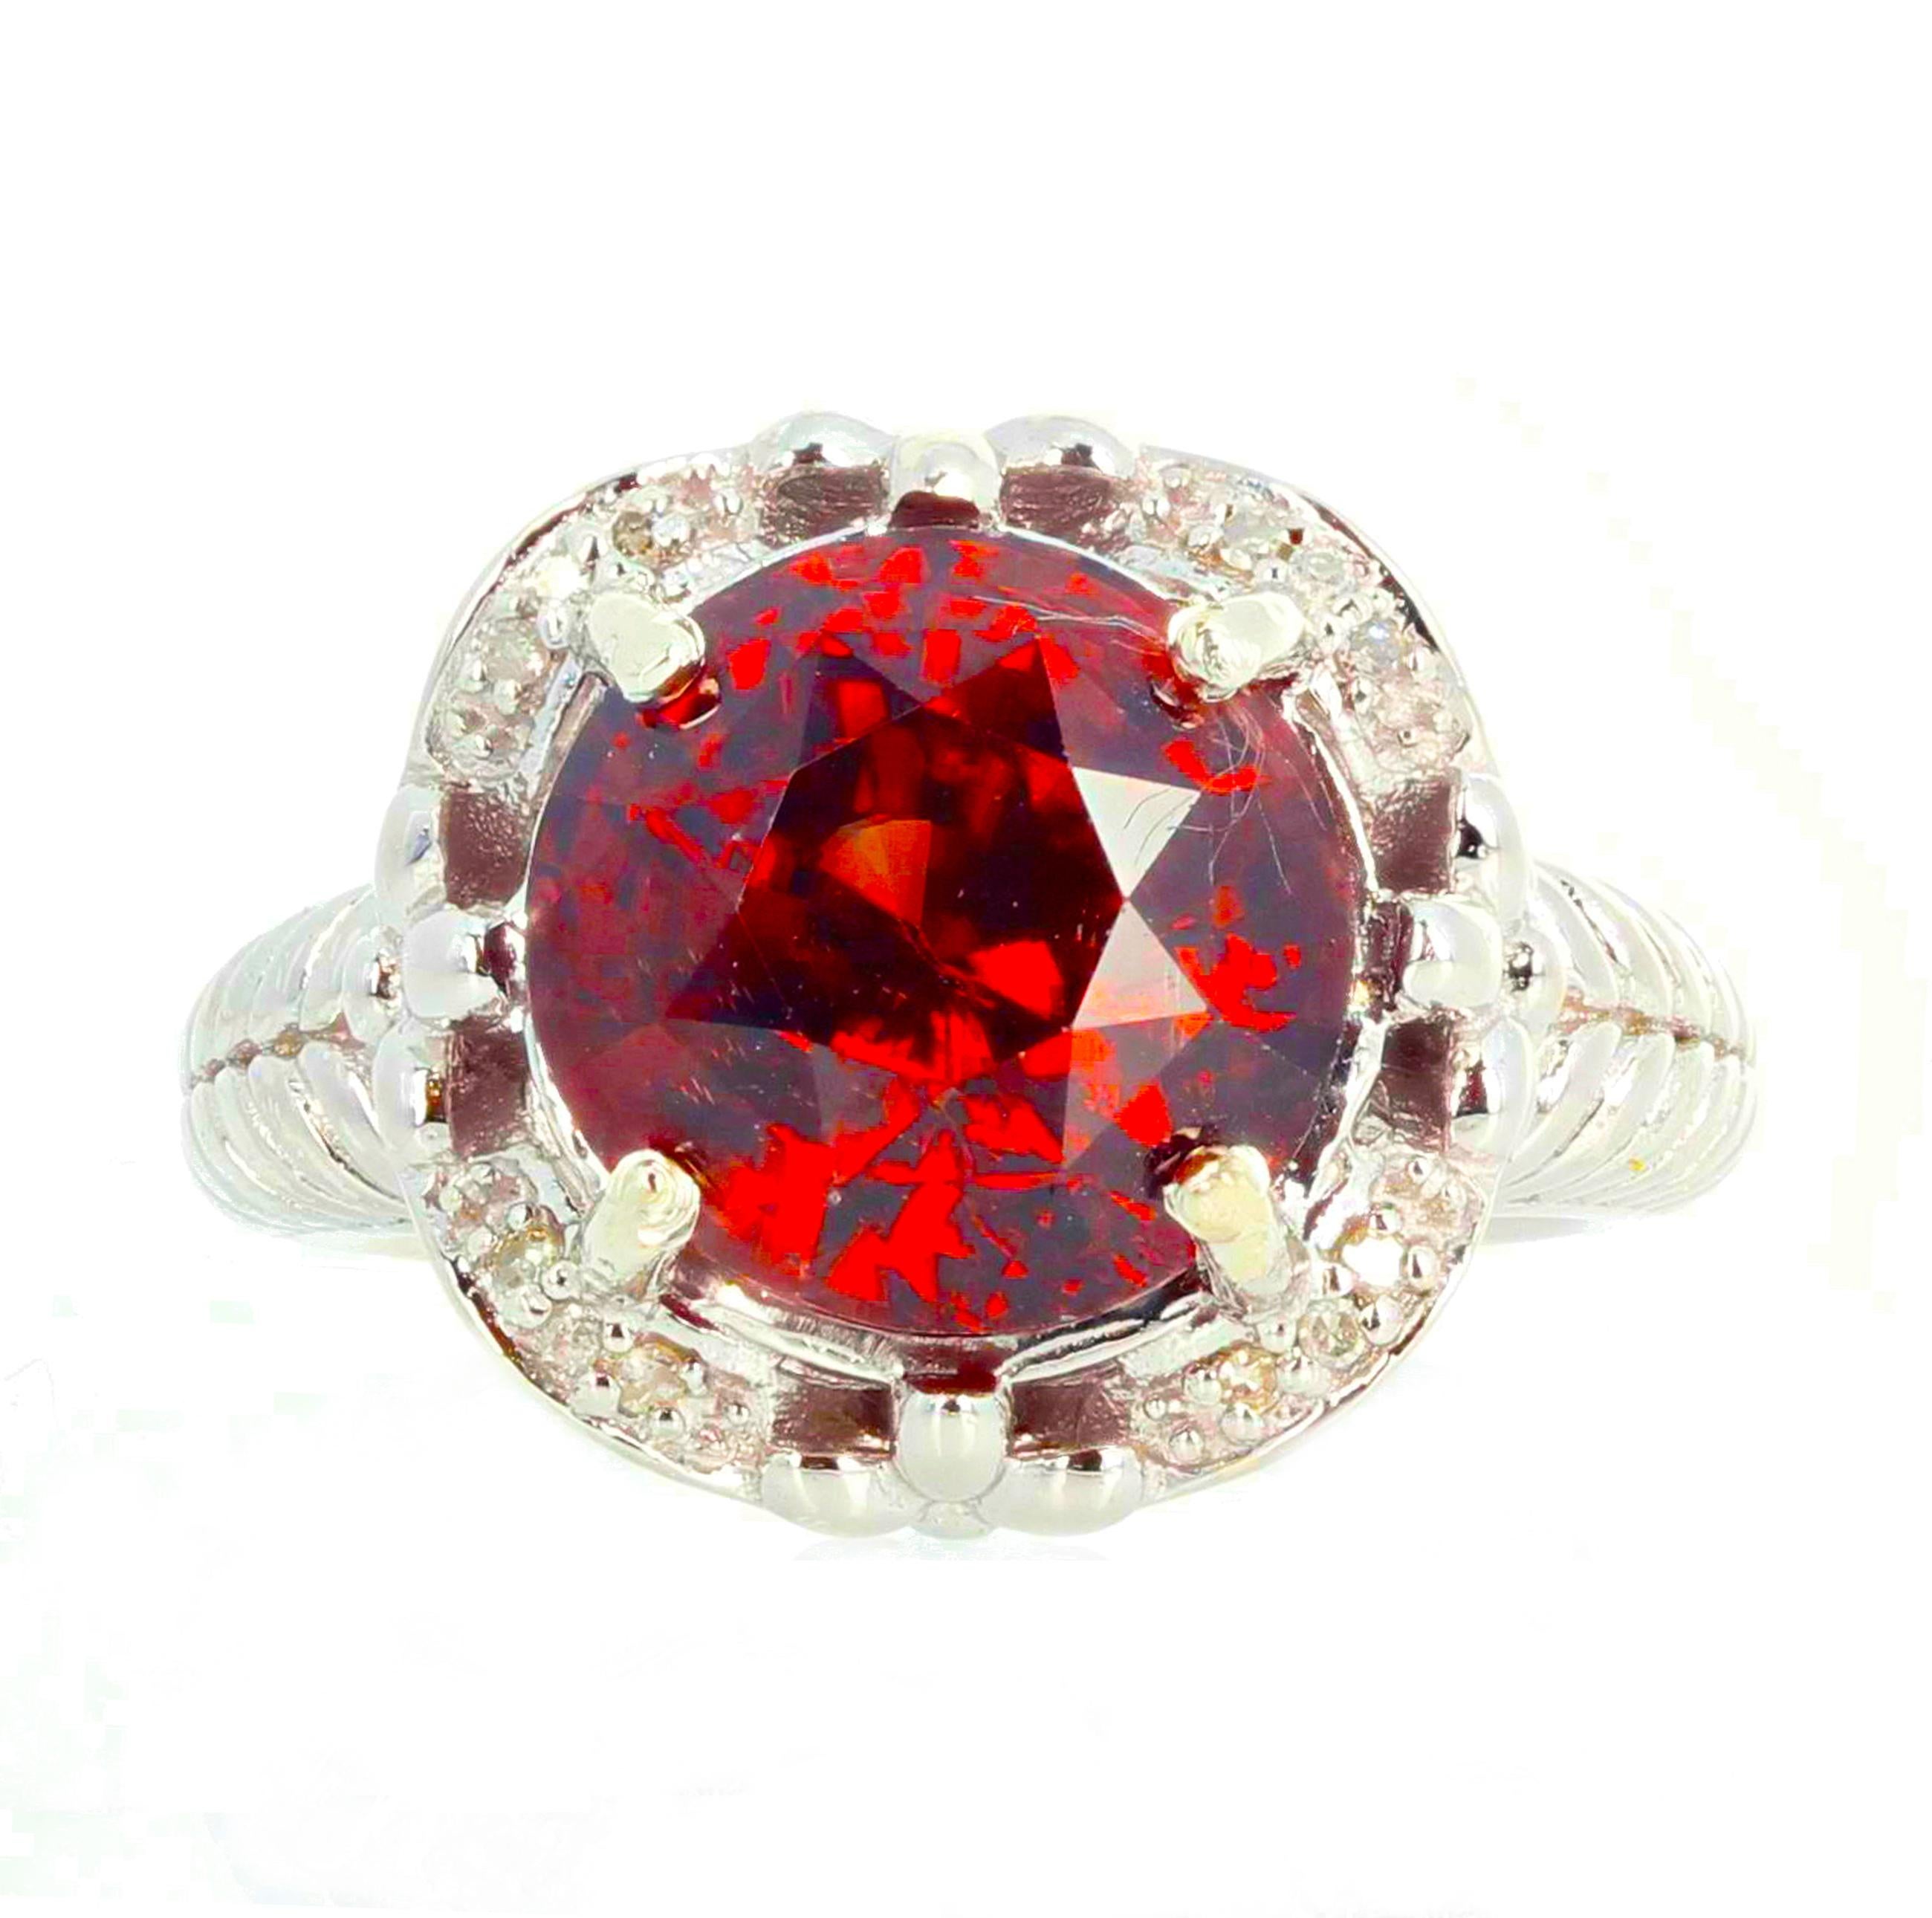 Beyond glittering unique 11.2 mm reddish orangy natural Cambodian Zircon set with teeny tiny diamonds (0.06 carats) in Platinum plated sterling silver ring size 7 (sizable).  